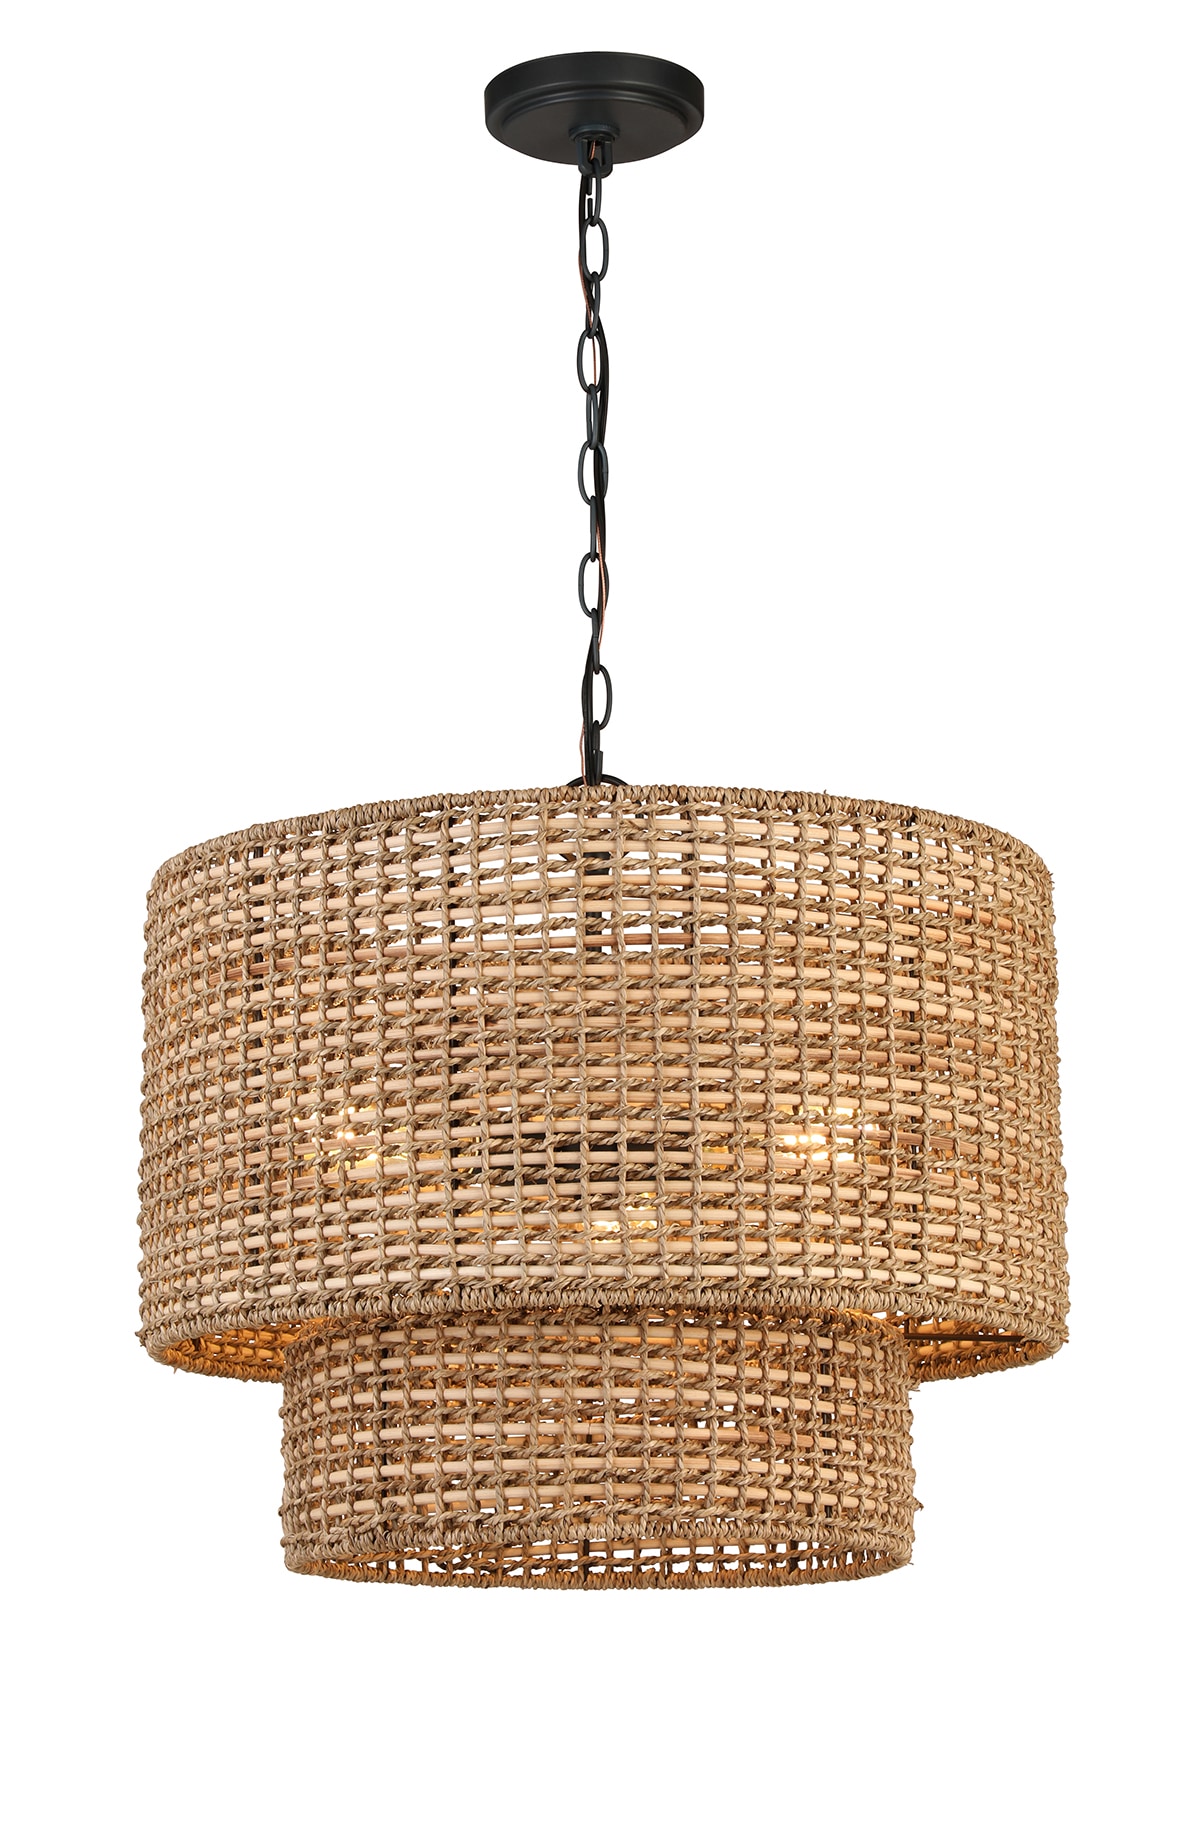 Traditional Drum Pendant Light, How Do You Install A Hanging Light Fixture With Chain